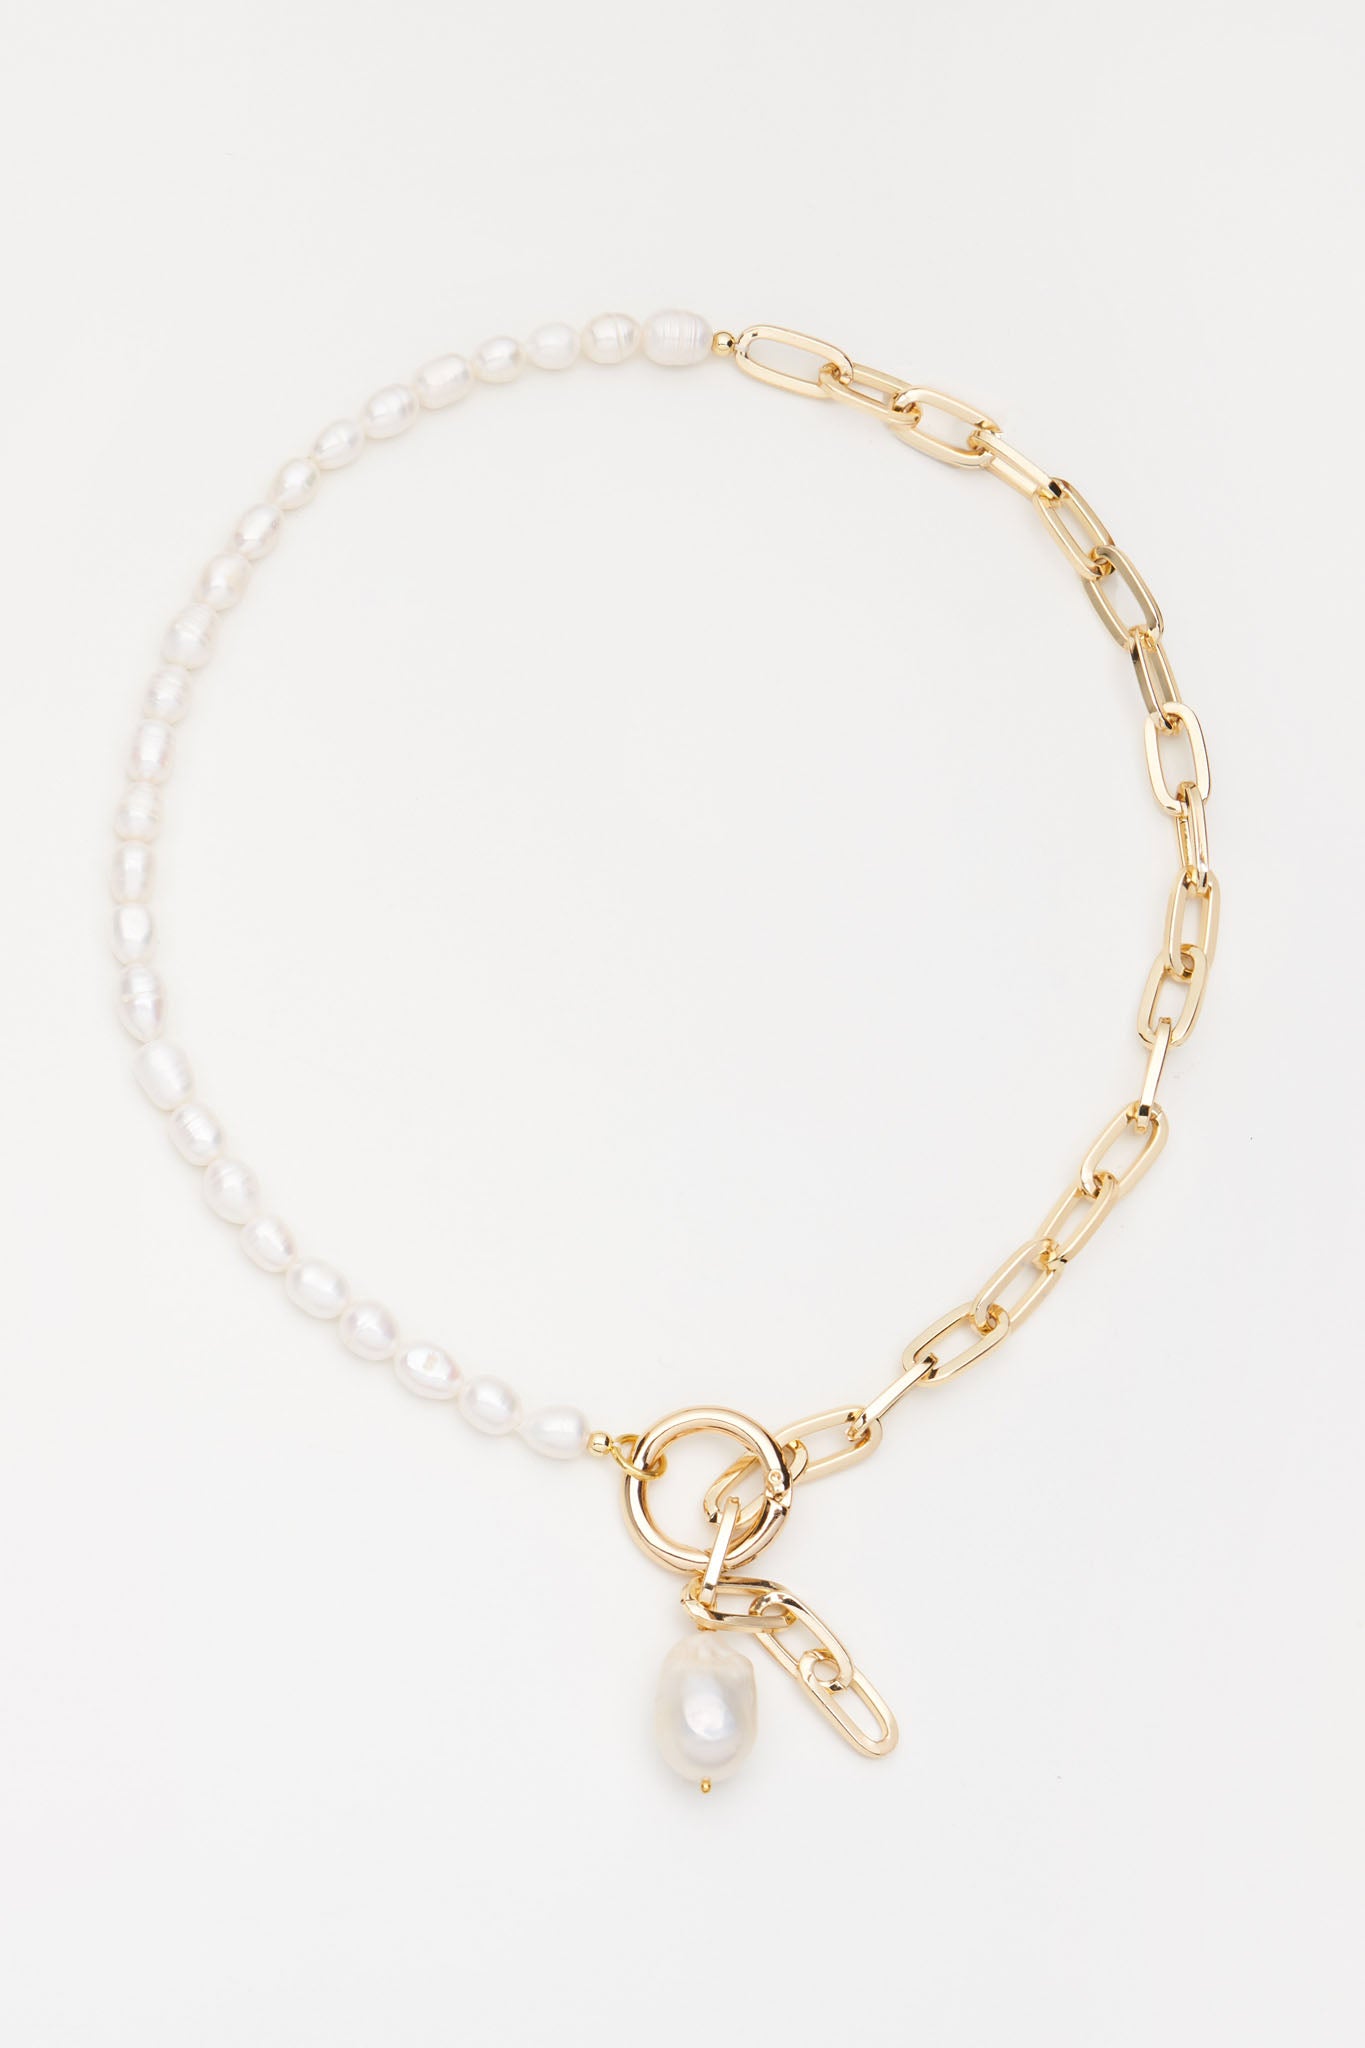 Pearl and gold chain necklace with pendant